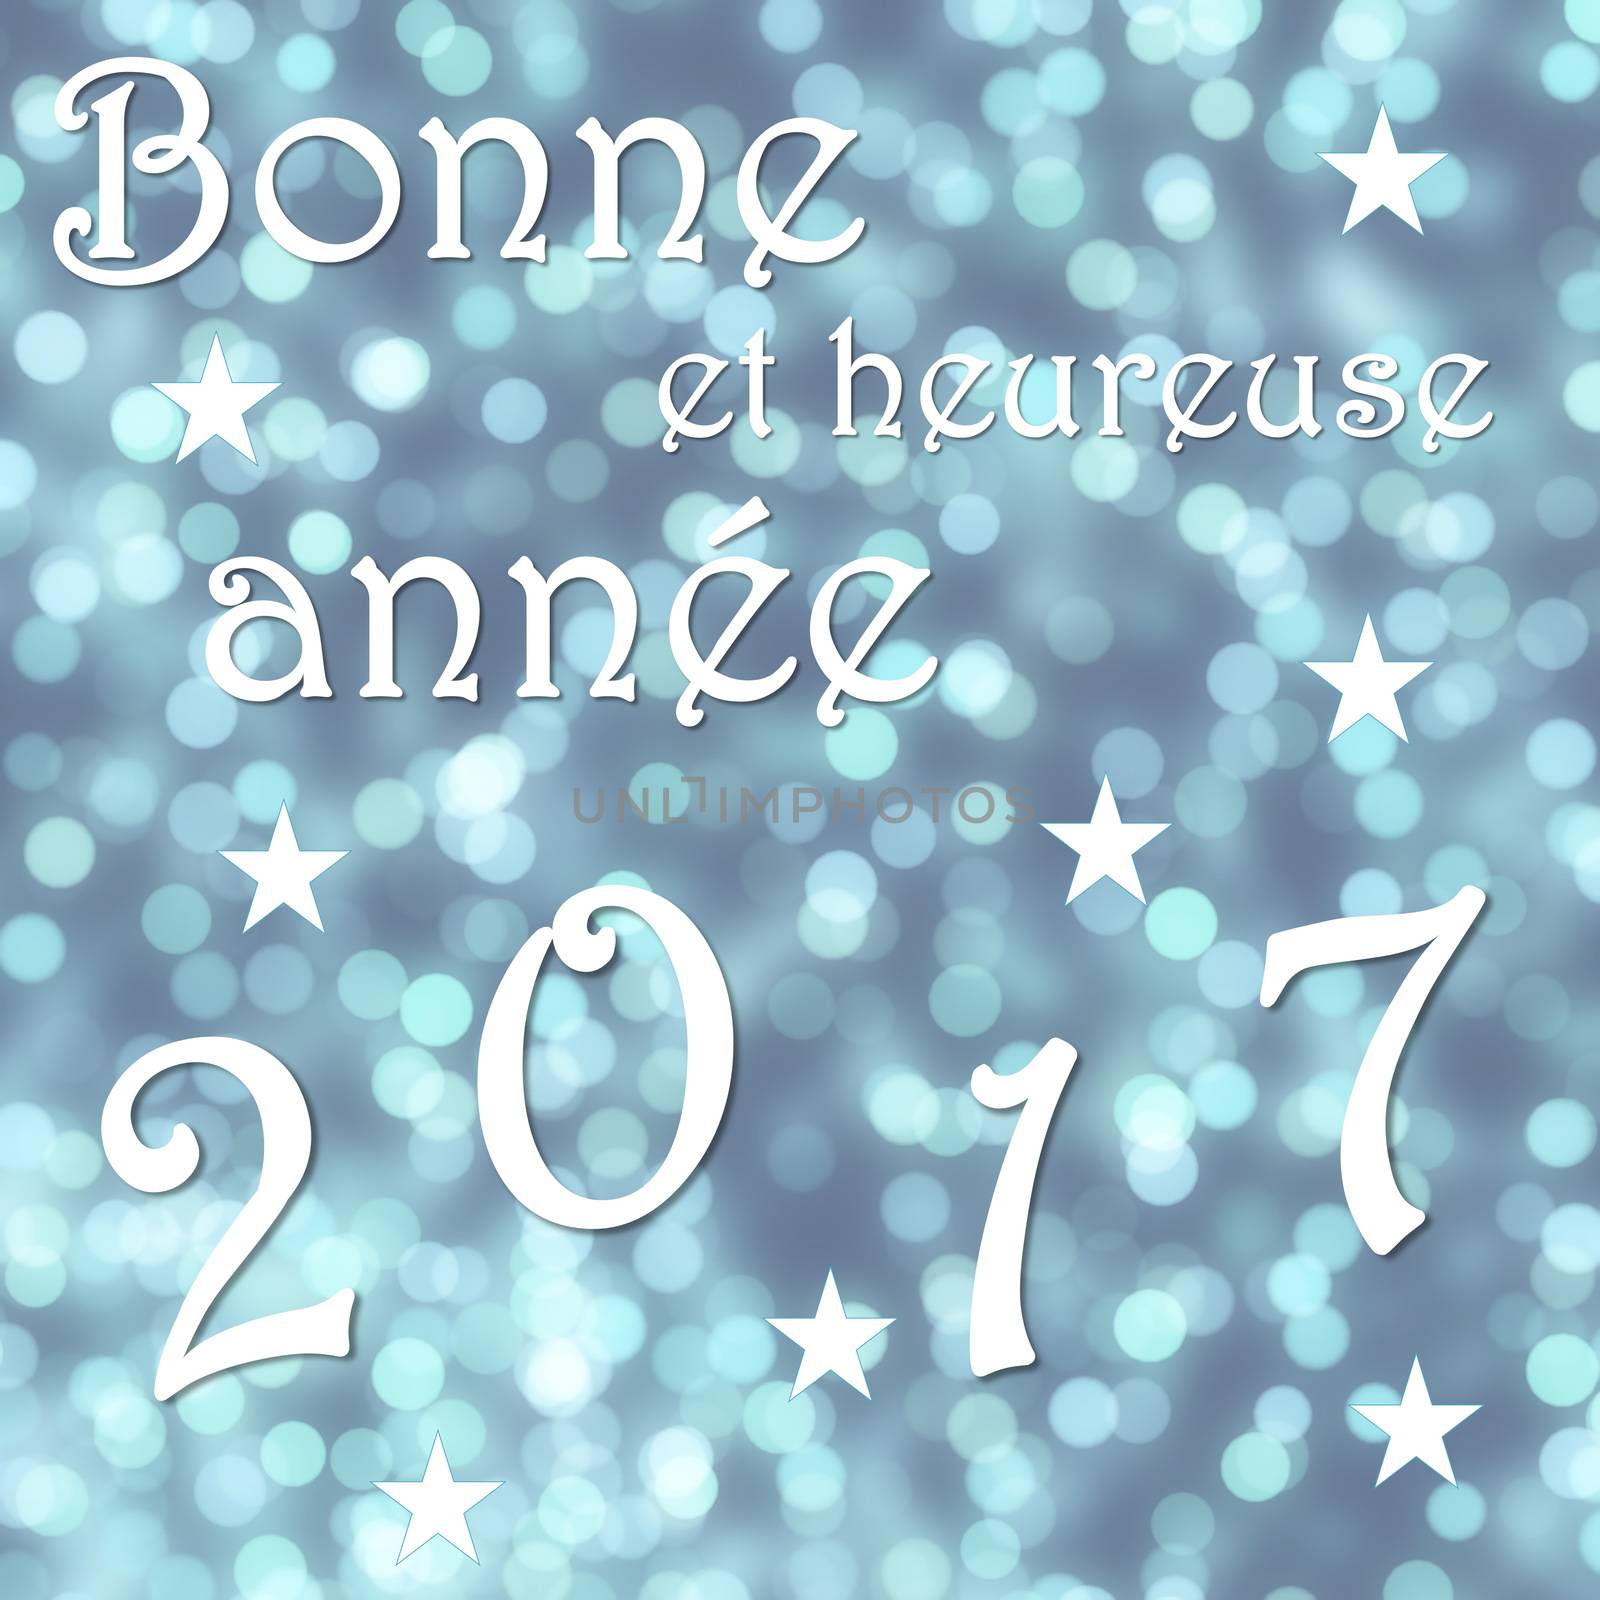 Happy new year 2017, french - 3D render by Elenaphotos21